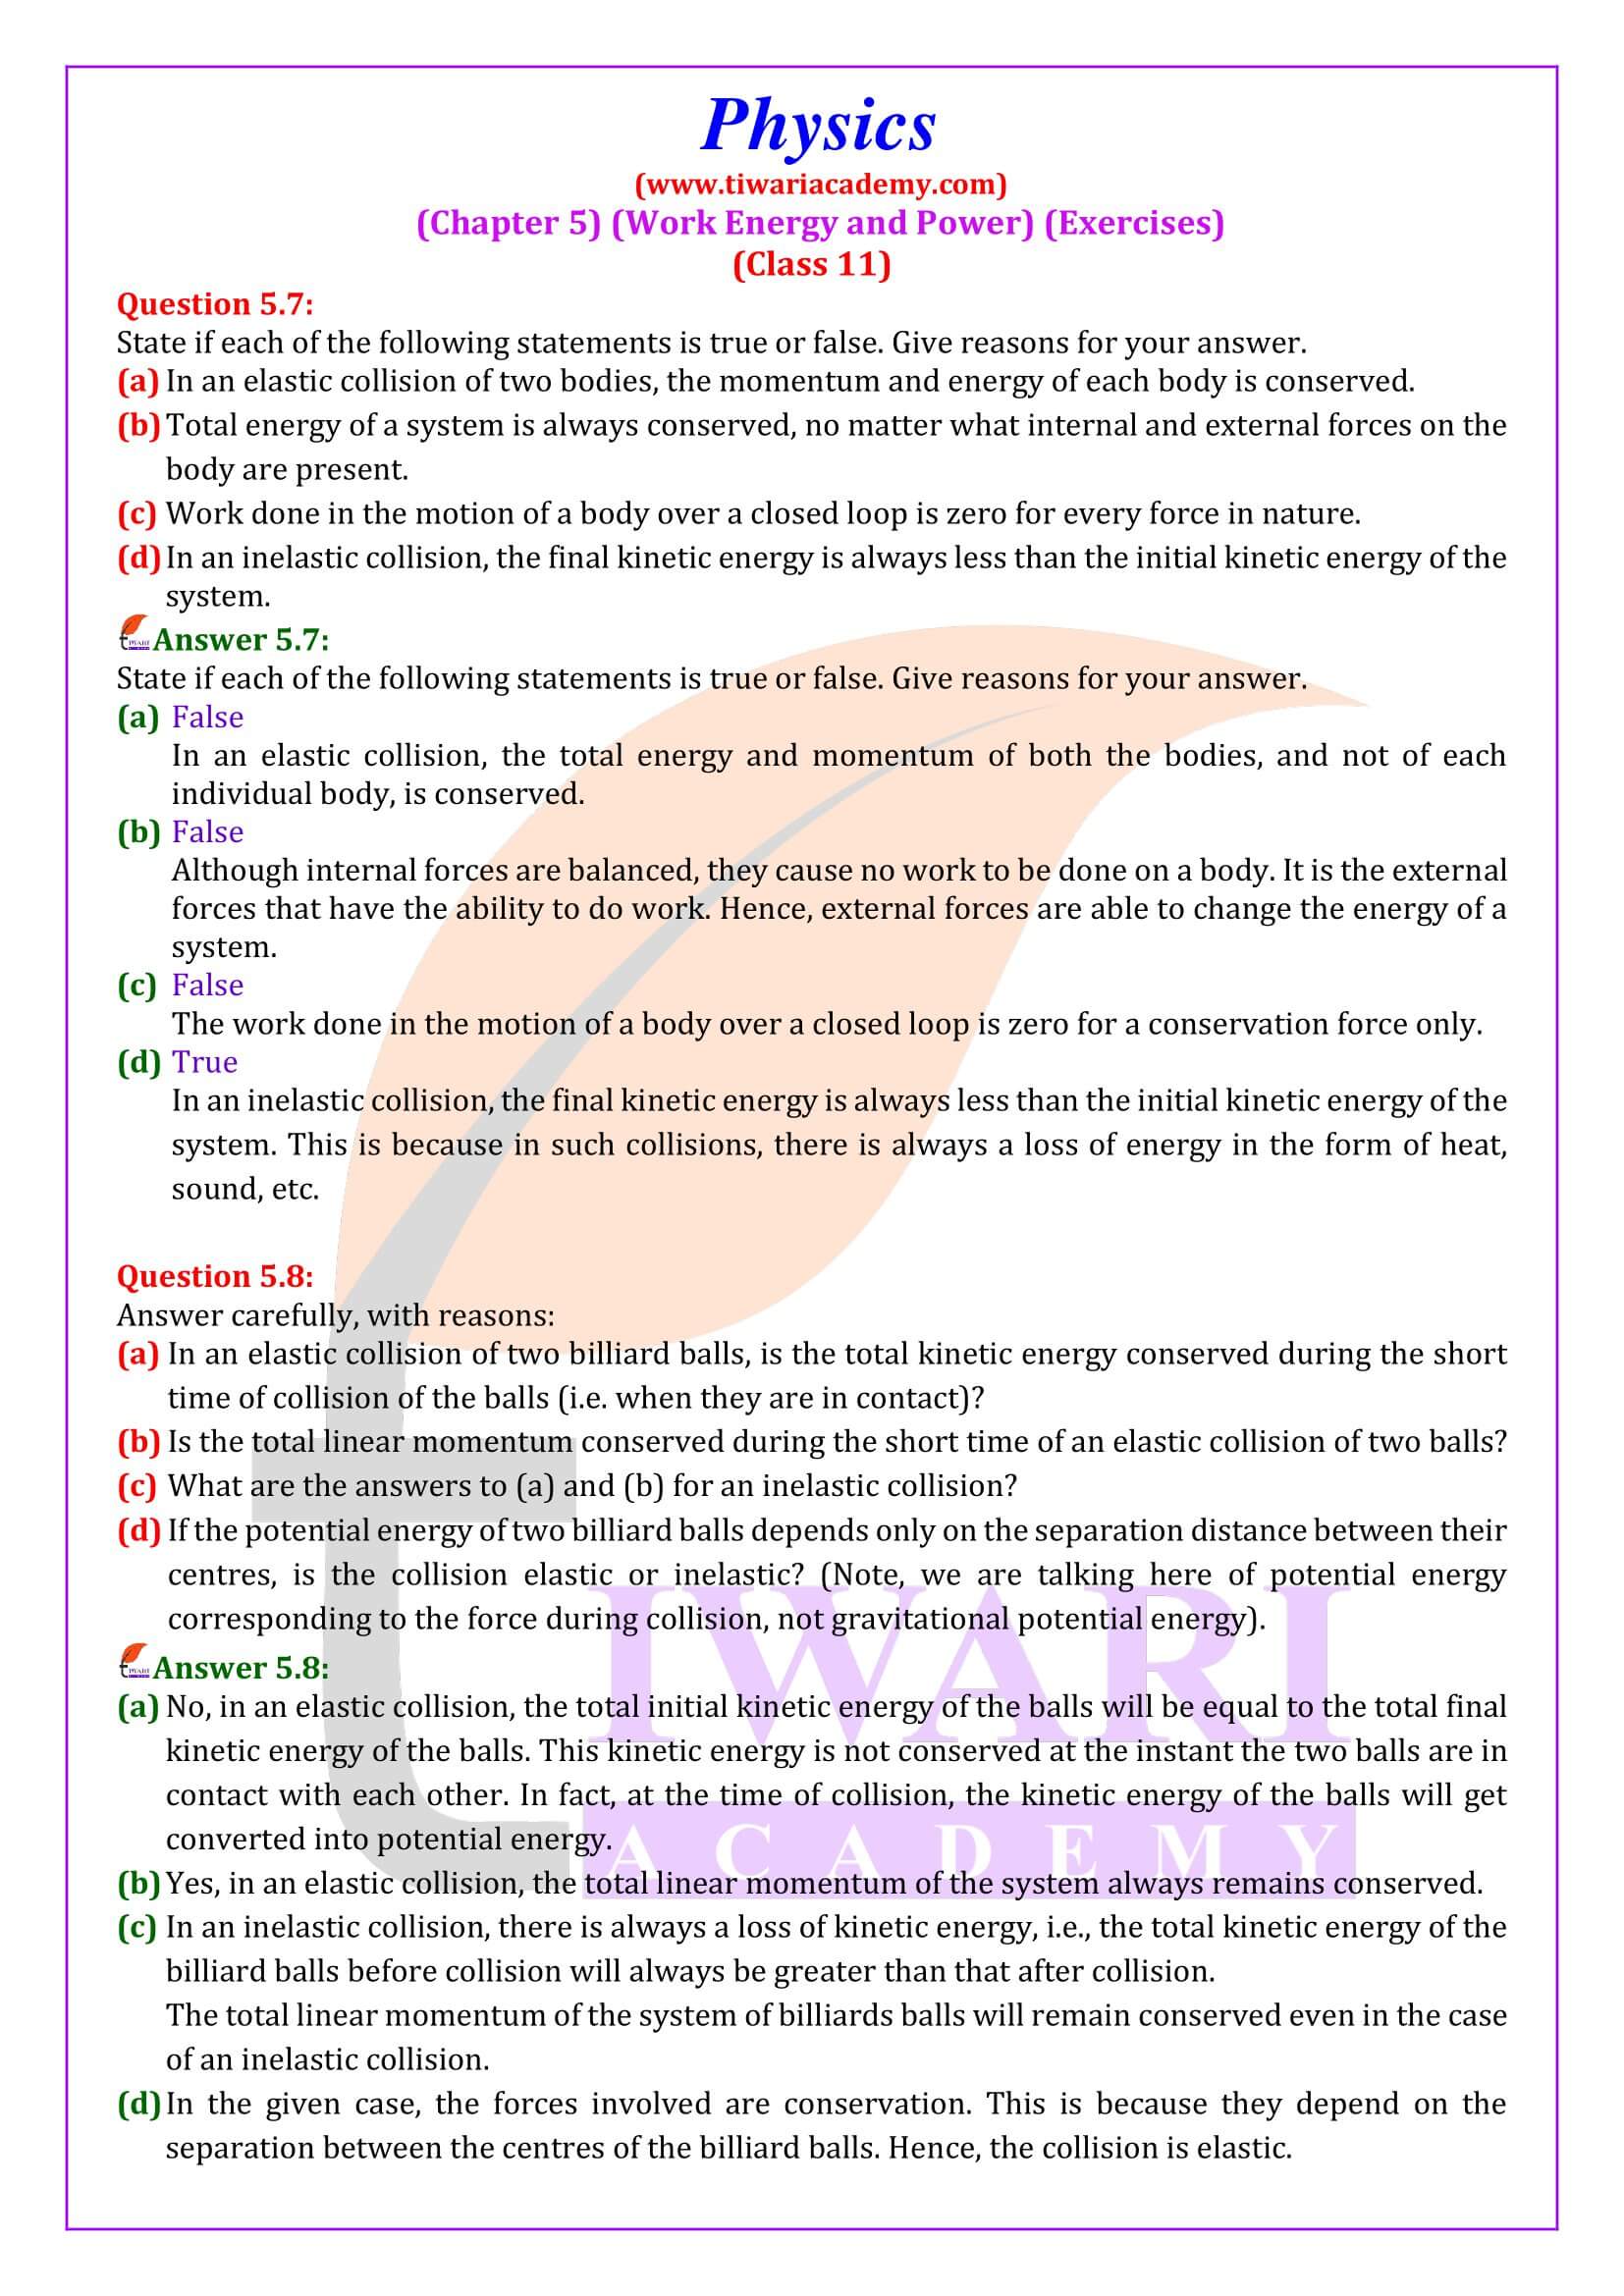 NCERT Solutions for Class 11 Physics Chapter 5 answers